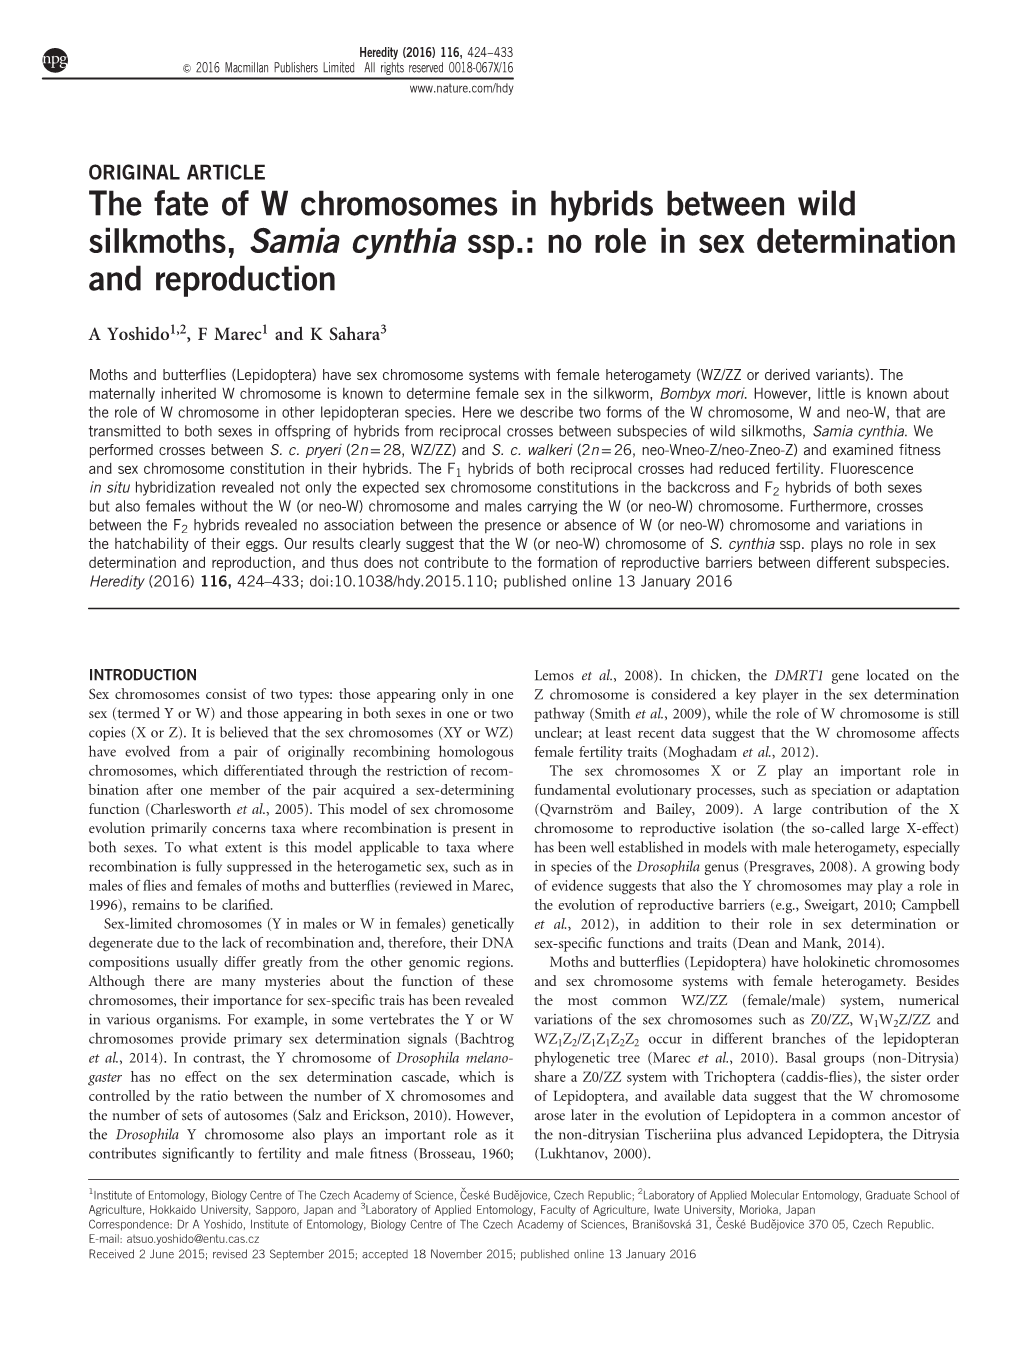 The Fate of W Chromosomes in Hybrids Between Wild Silkmoths, Samia Cynthia Ssp.: No Role in Sex Determination and Reproduction